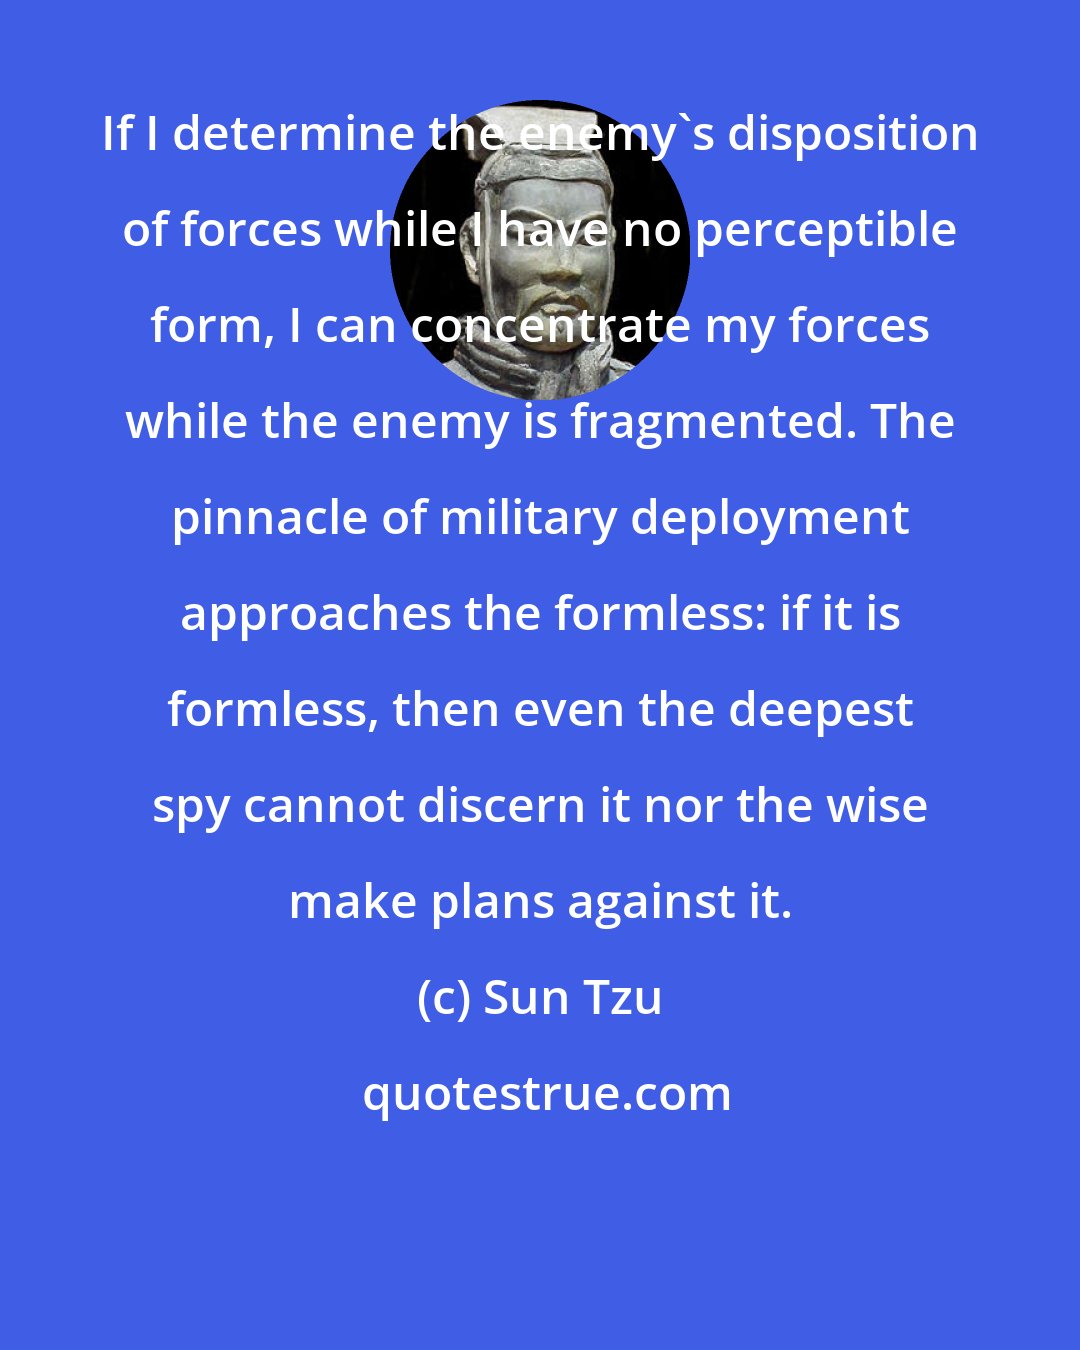 Sun Tzu: If I determine the enemy's disposition of forces while I have no perceptible form, I can concentrate my forces while the enemy is fragmented. The pinnacle of military deployment approaches the formless: if it is formless, then even the deepest spy cannot discern it nor the wise make plans against it.